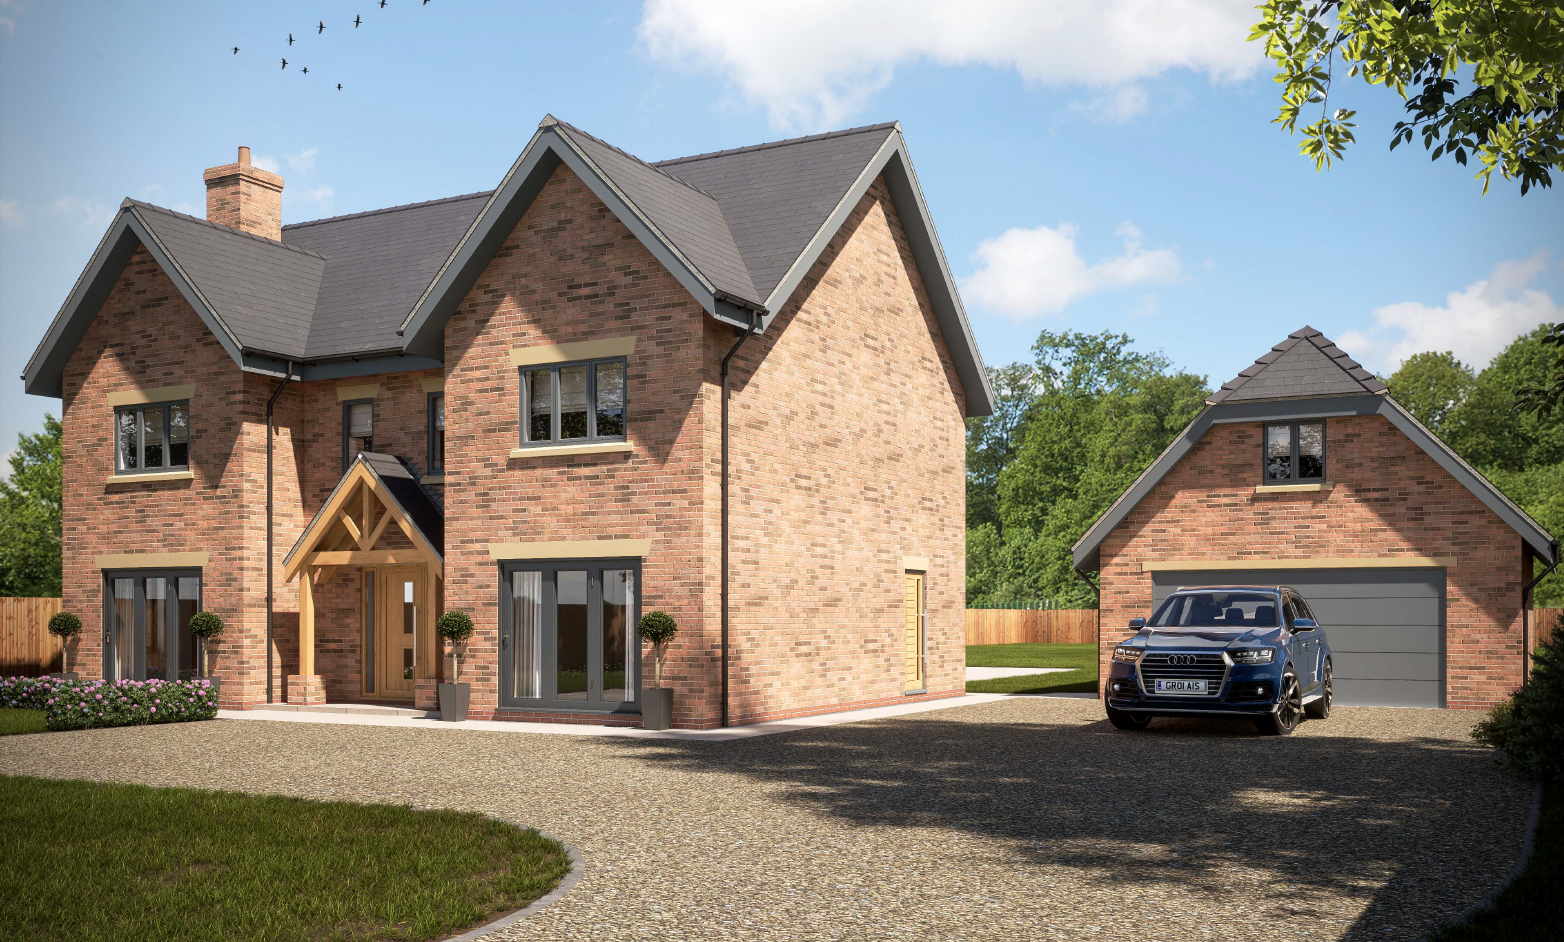 Full planning permission granted for new self build home in Sudbrooke near Lincoln